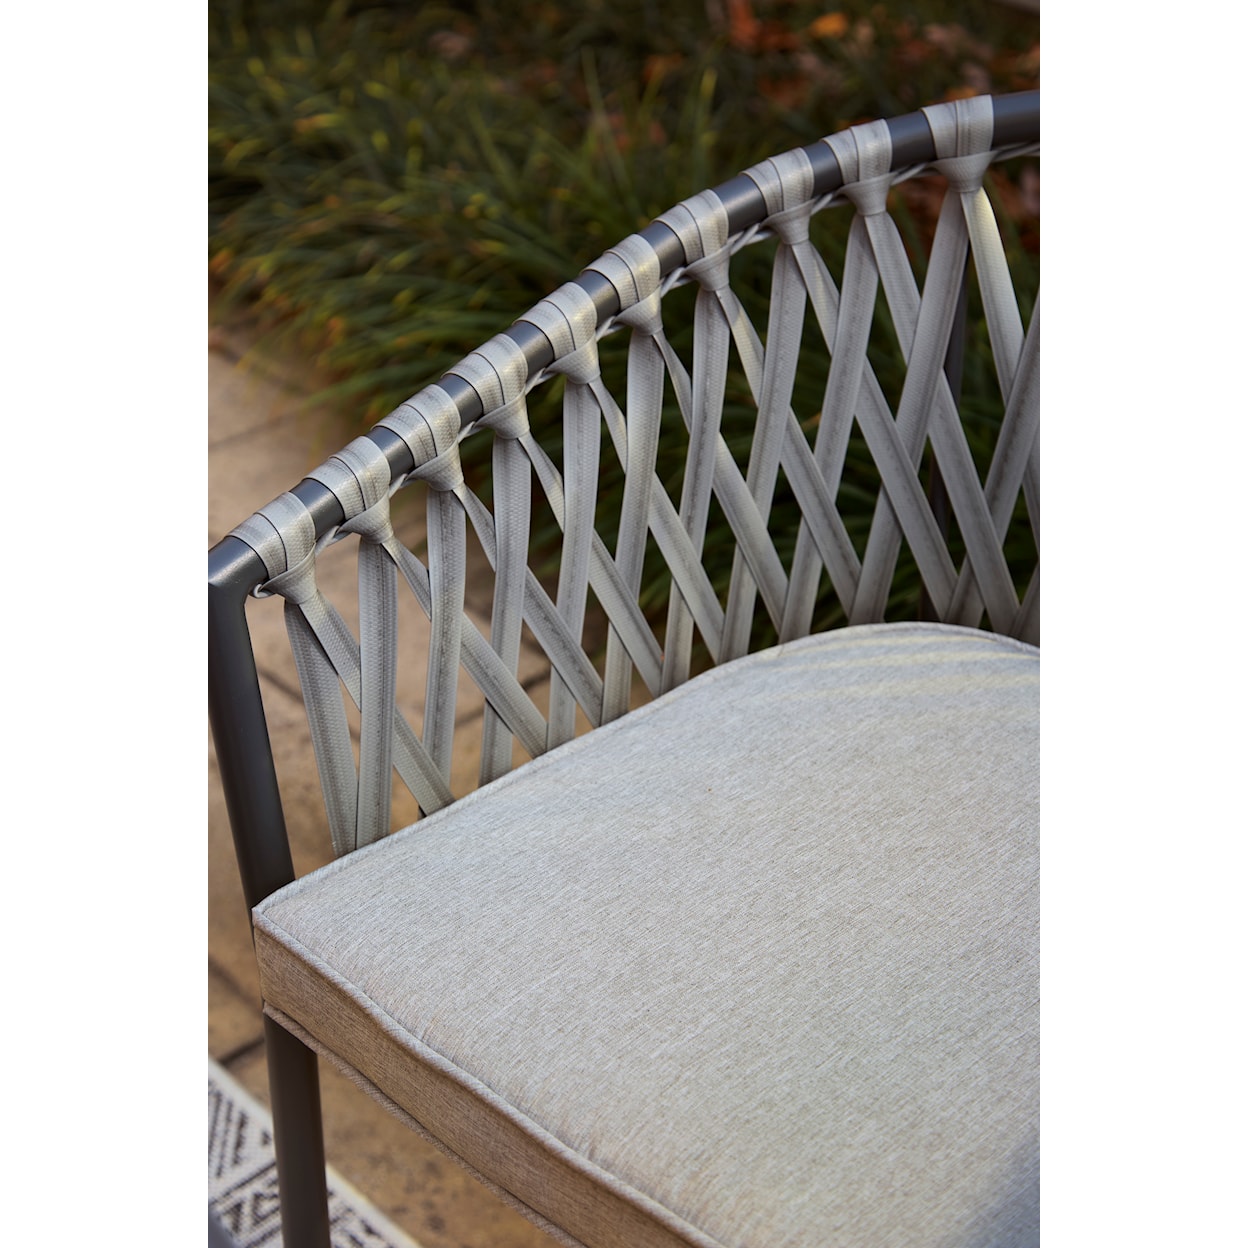 Signature Design by Ashley Palm Bliss Outdoor Dining Chair (Set of 4)